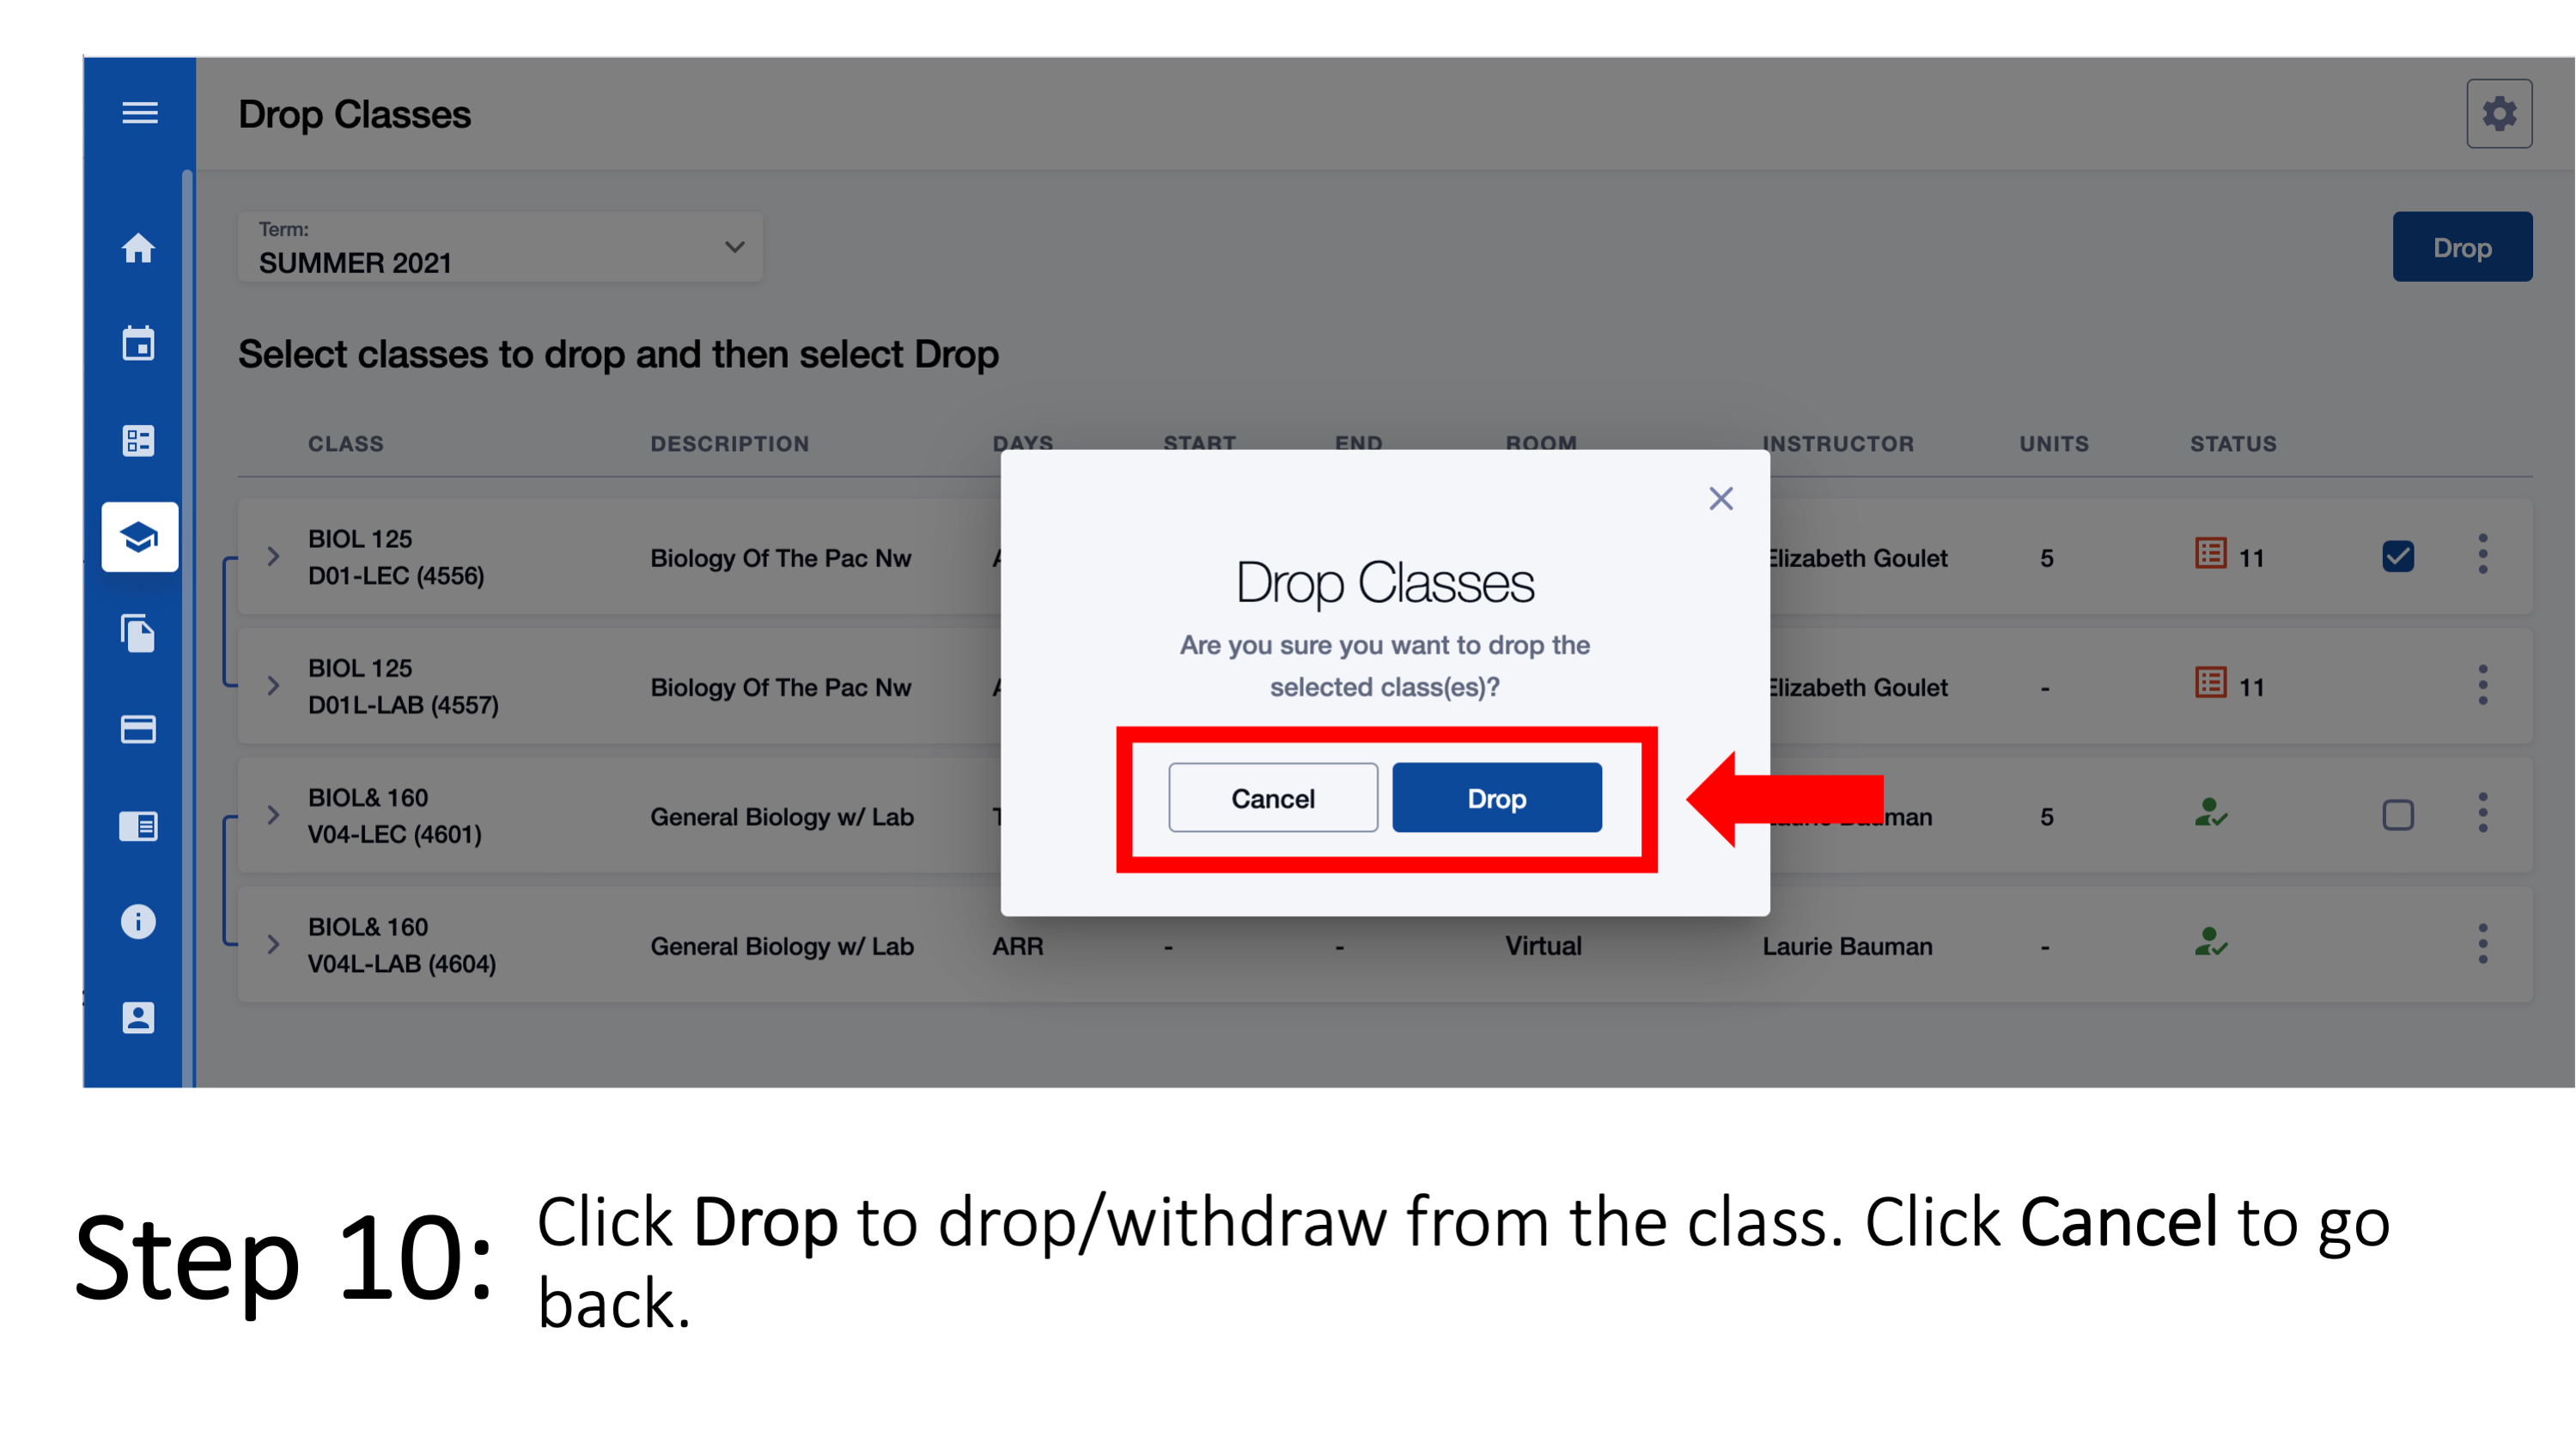 Step 10: Click Drop to drop/withdraw from the class. Click Cancel to go back.